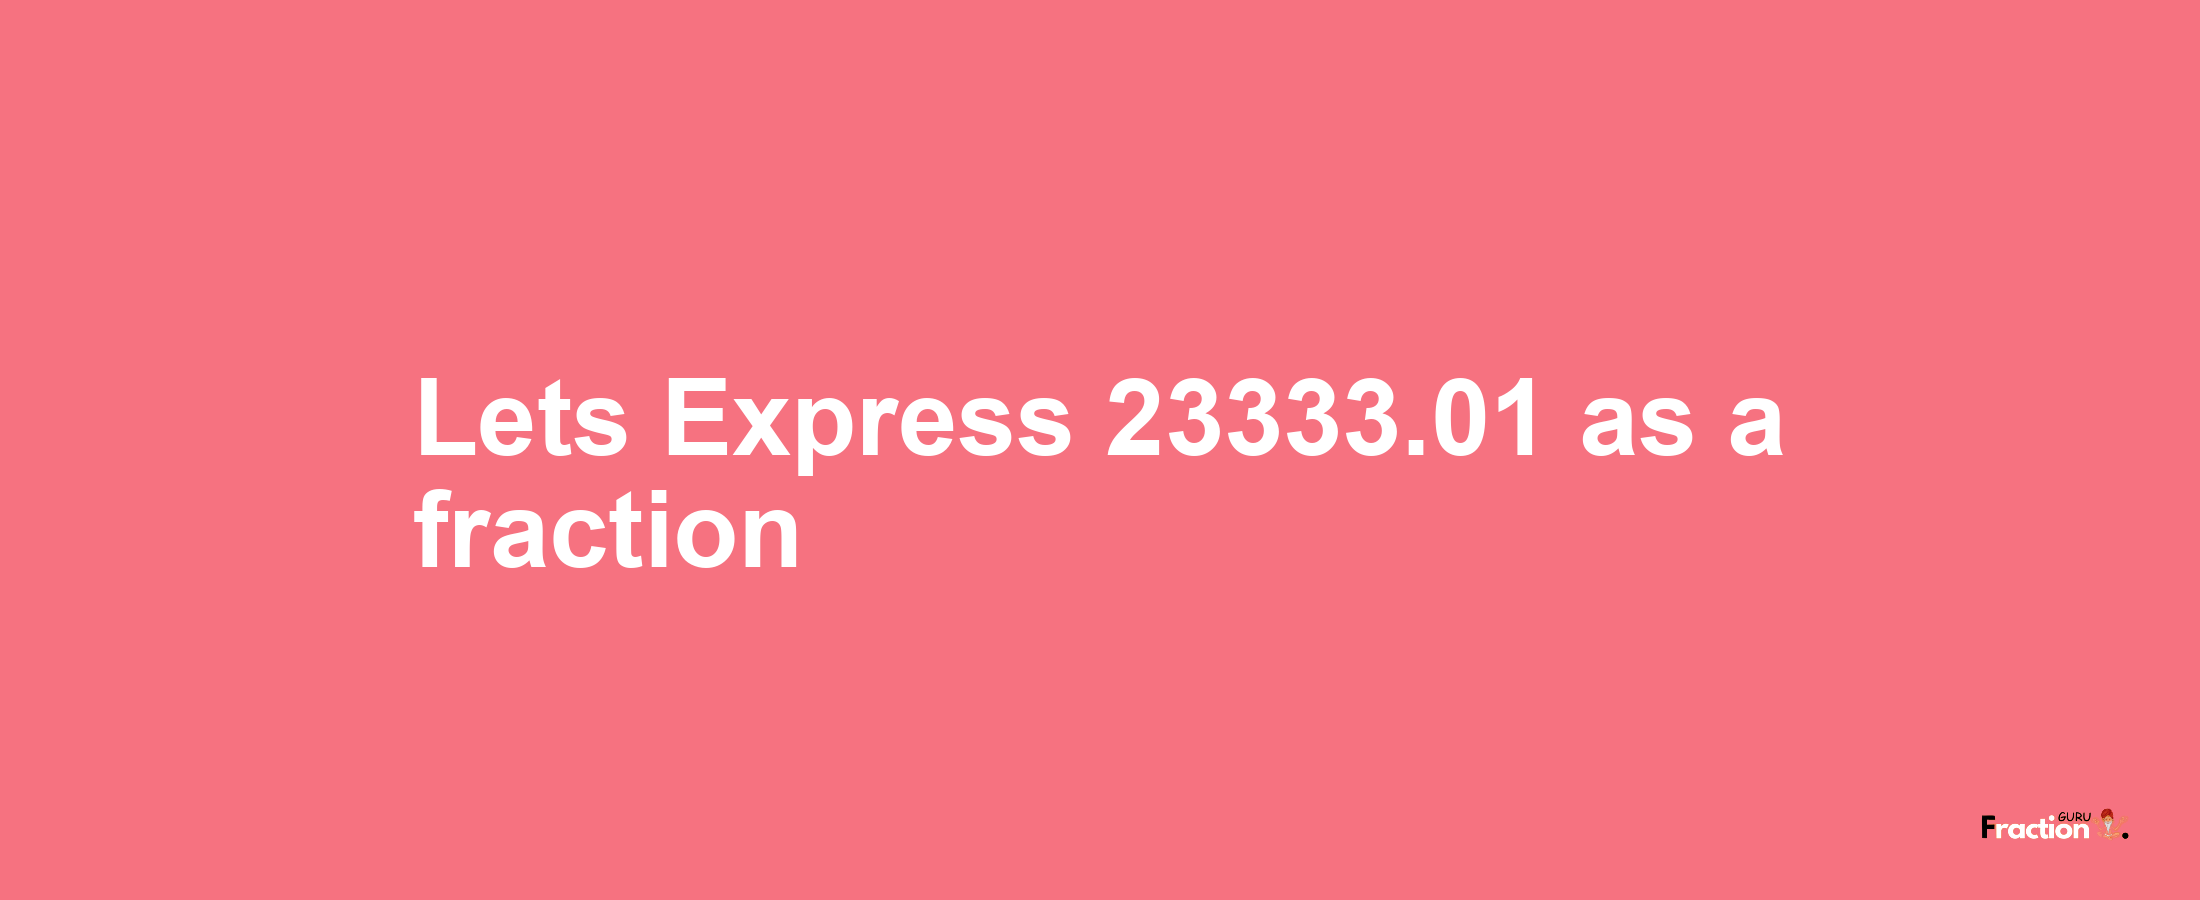 Lets Express 23333.01 as afraction